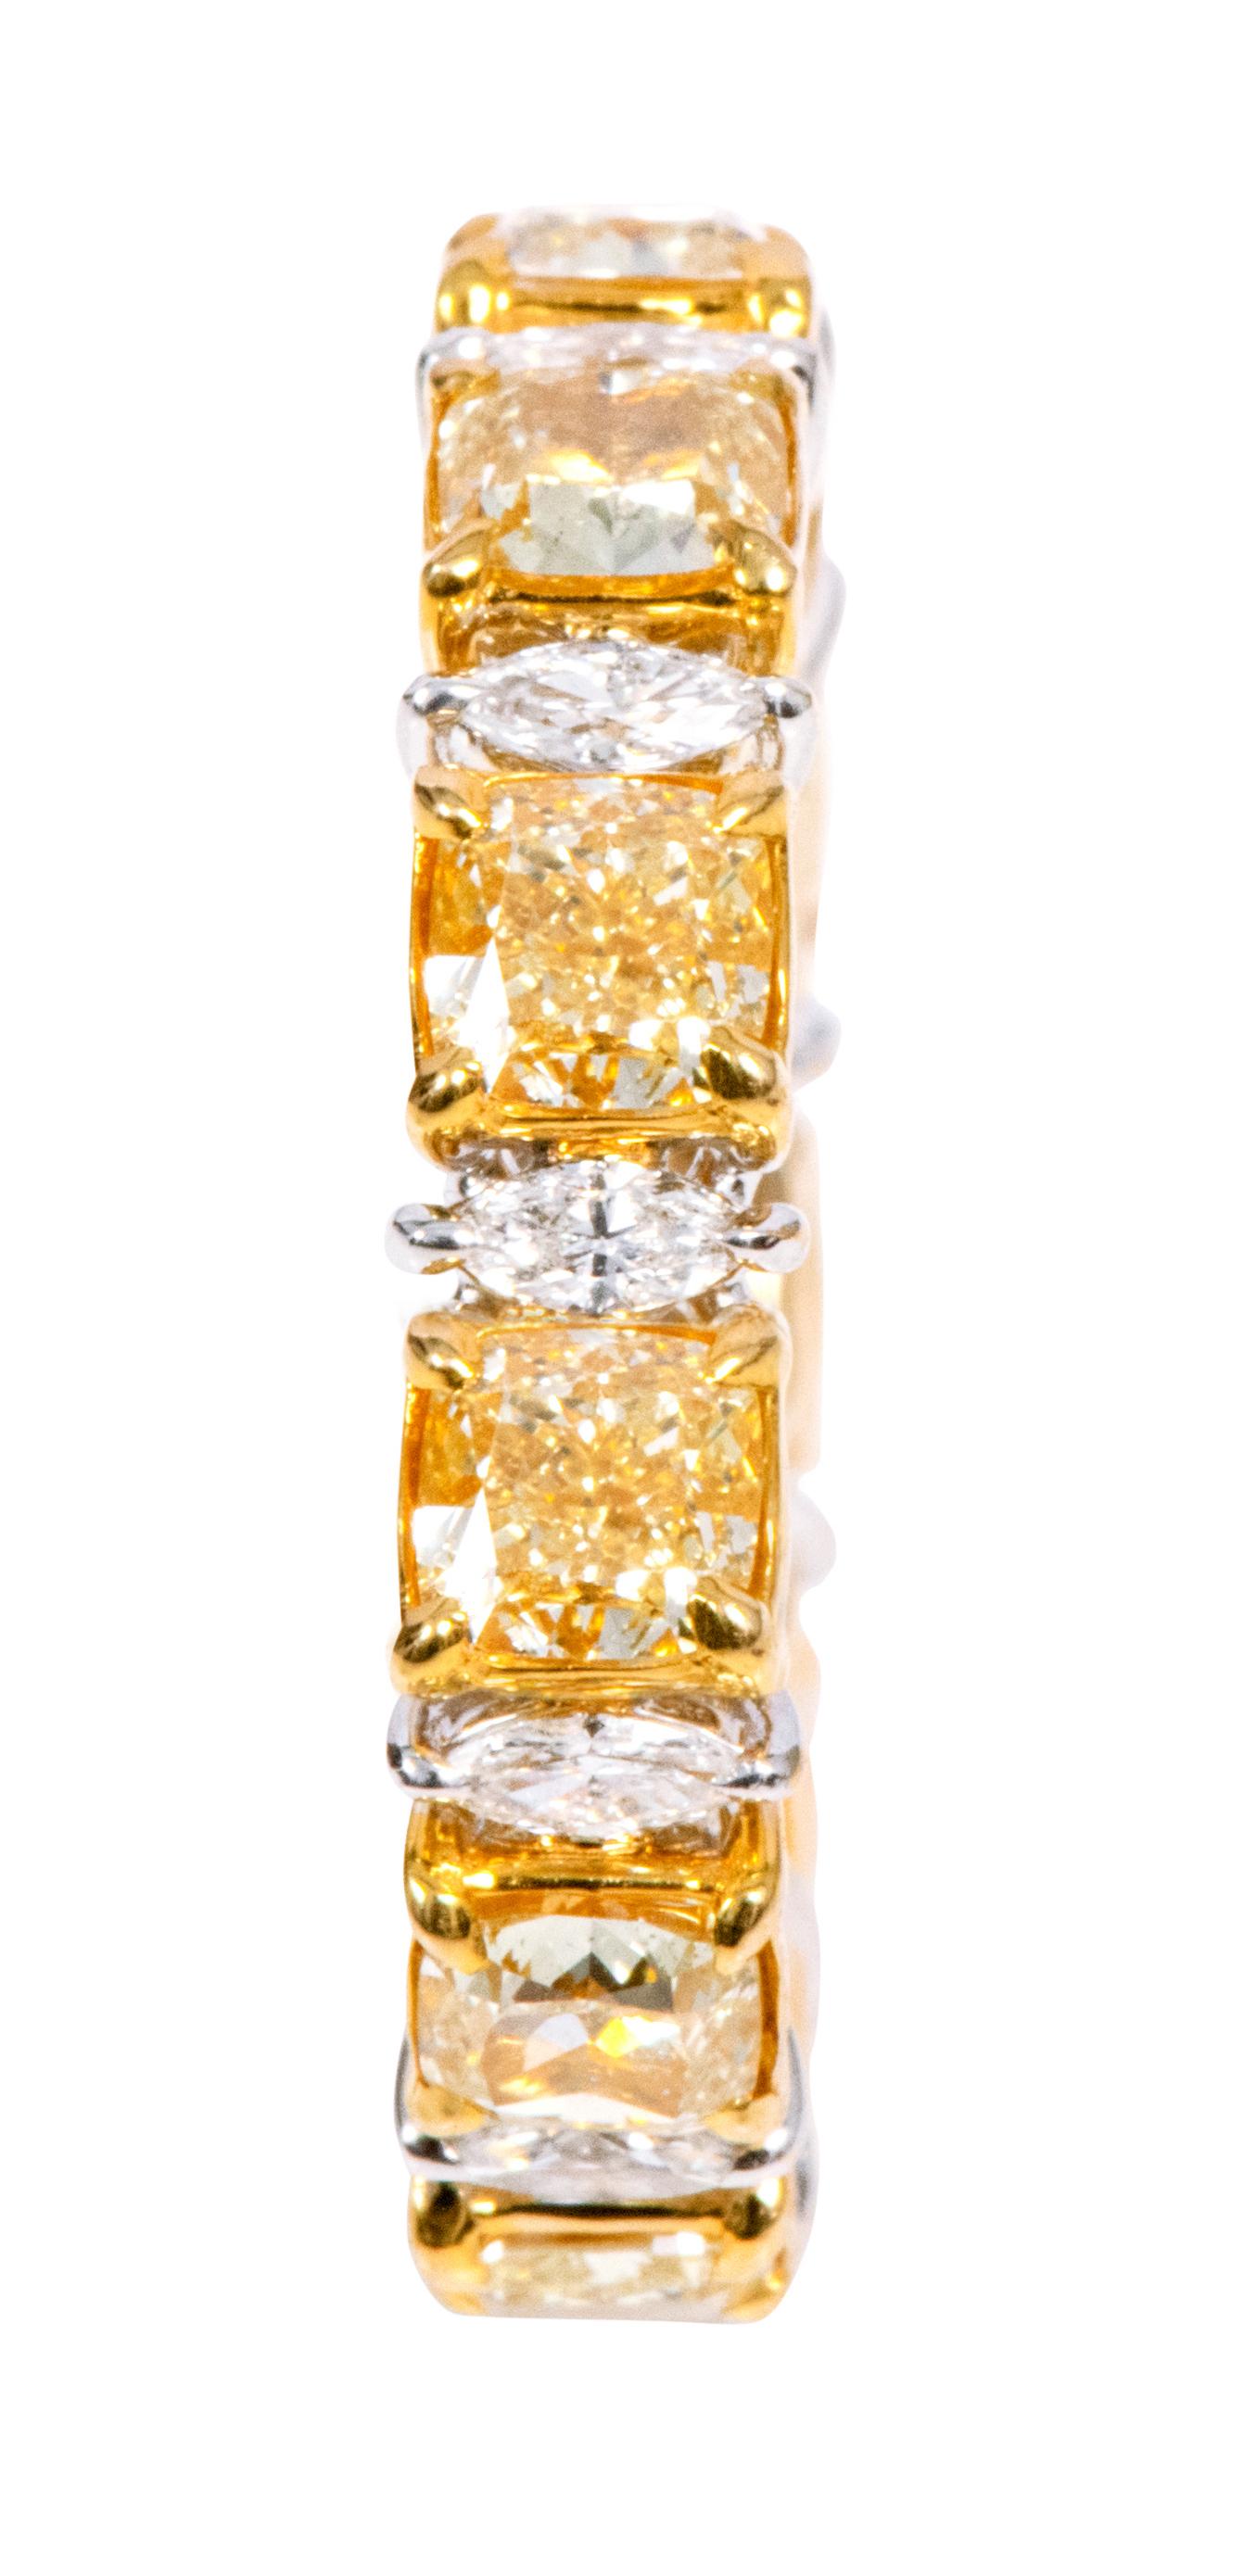 18 Karat Gold 5.99 Carat Solitaire Yellow and White Diamond Eternity Band Ring

Let the mystique and glamor of this gorgeous eternity band shower you with love all around. The eternity intense yellow cushion cut diamond band is perfectly set with 50